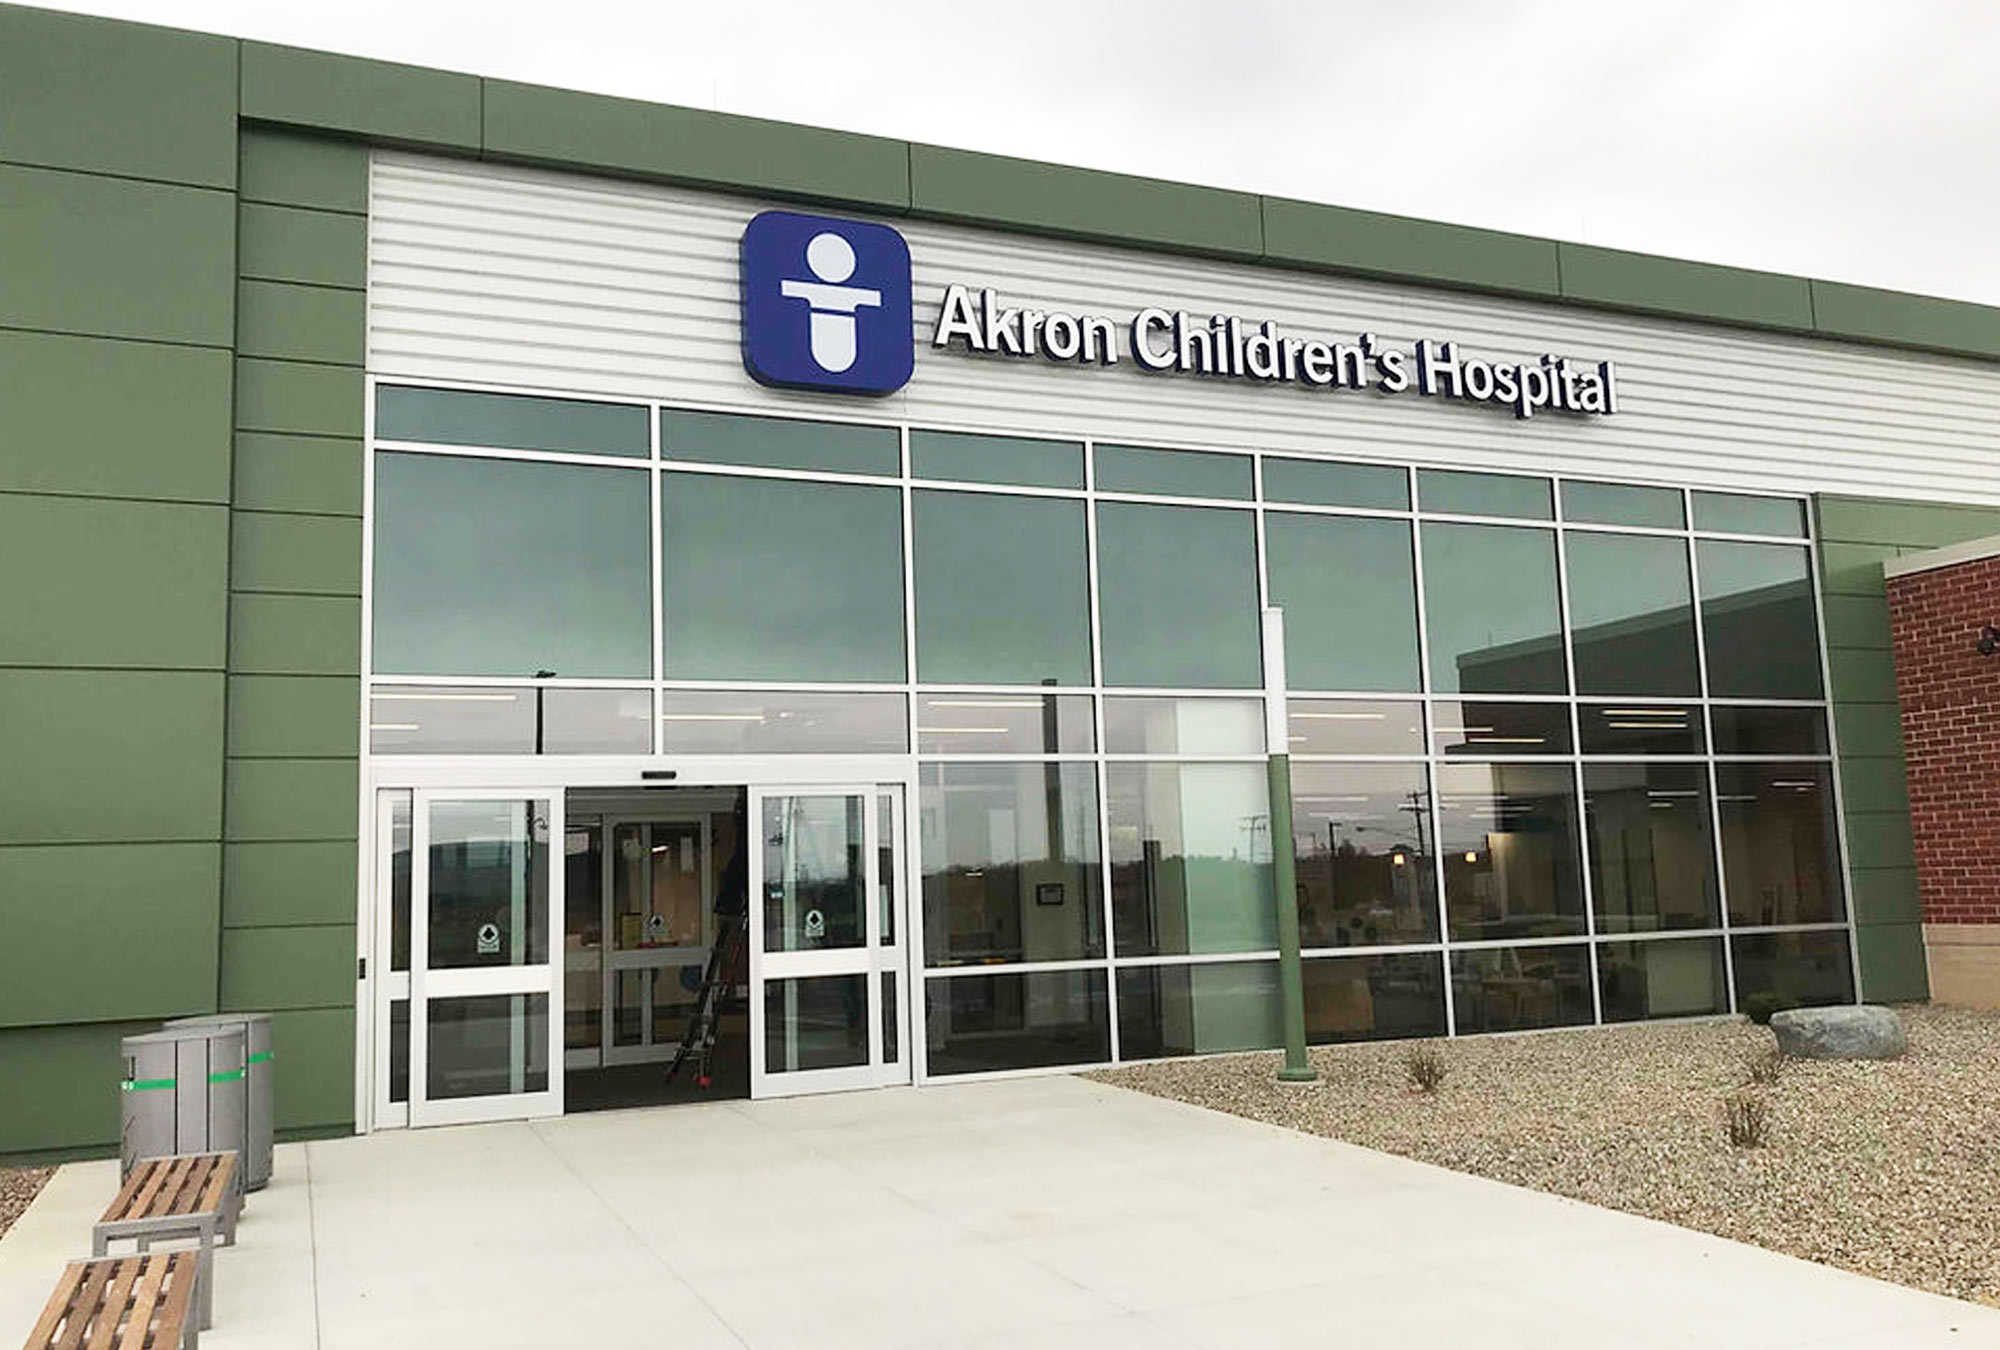 The Best Hospital Contractors Akron Children's Hospital Window Entrance - Portage County, Ohio by Fred Olivieri